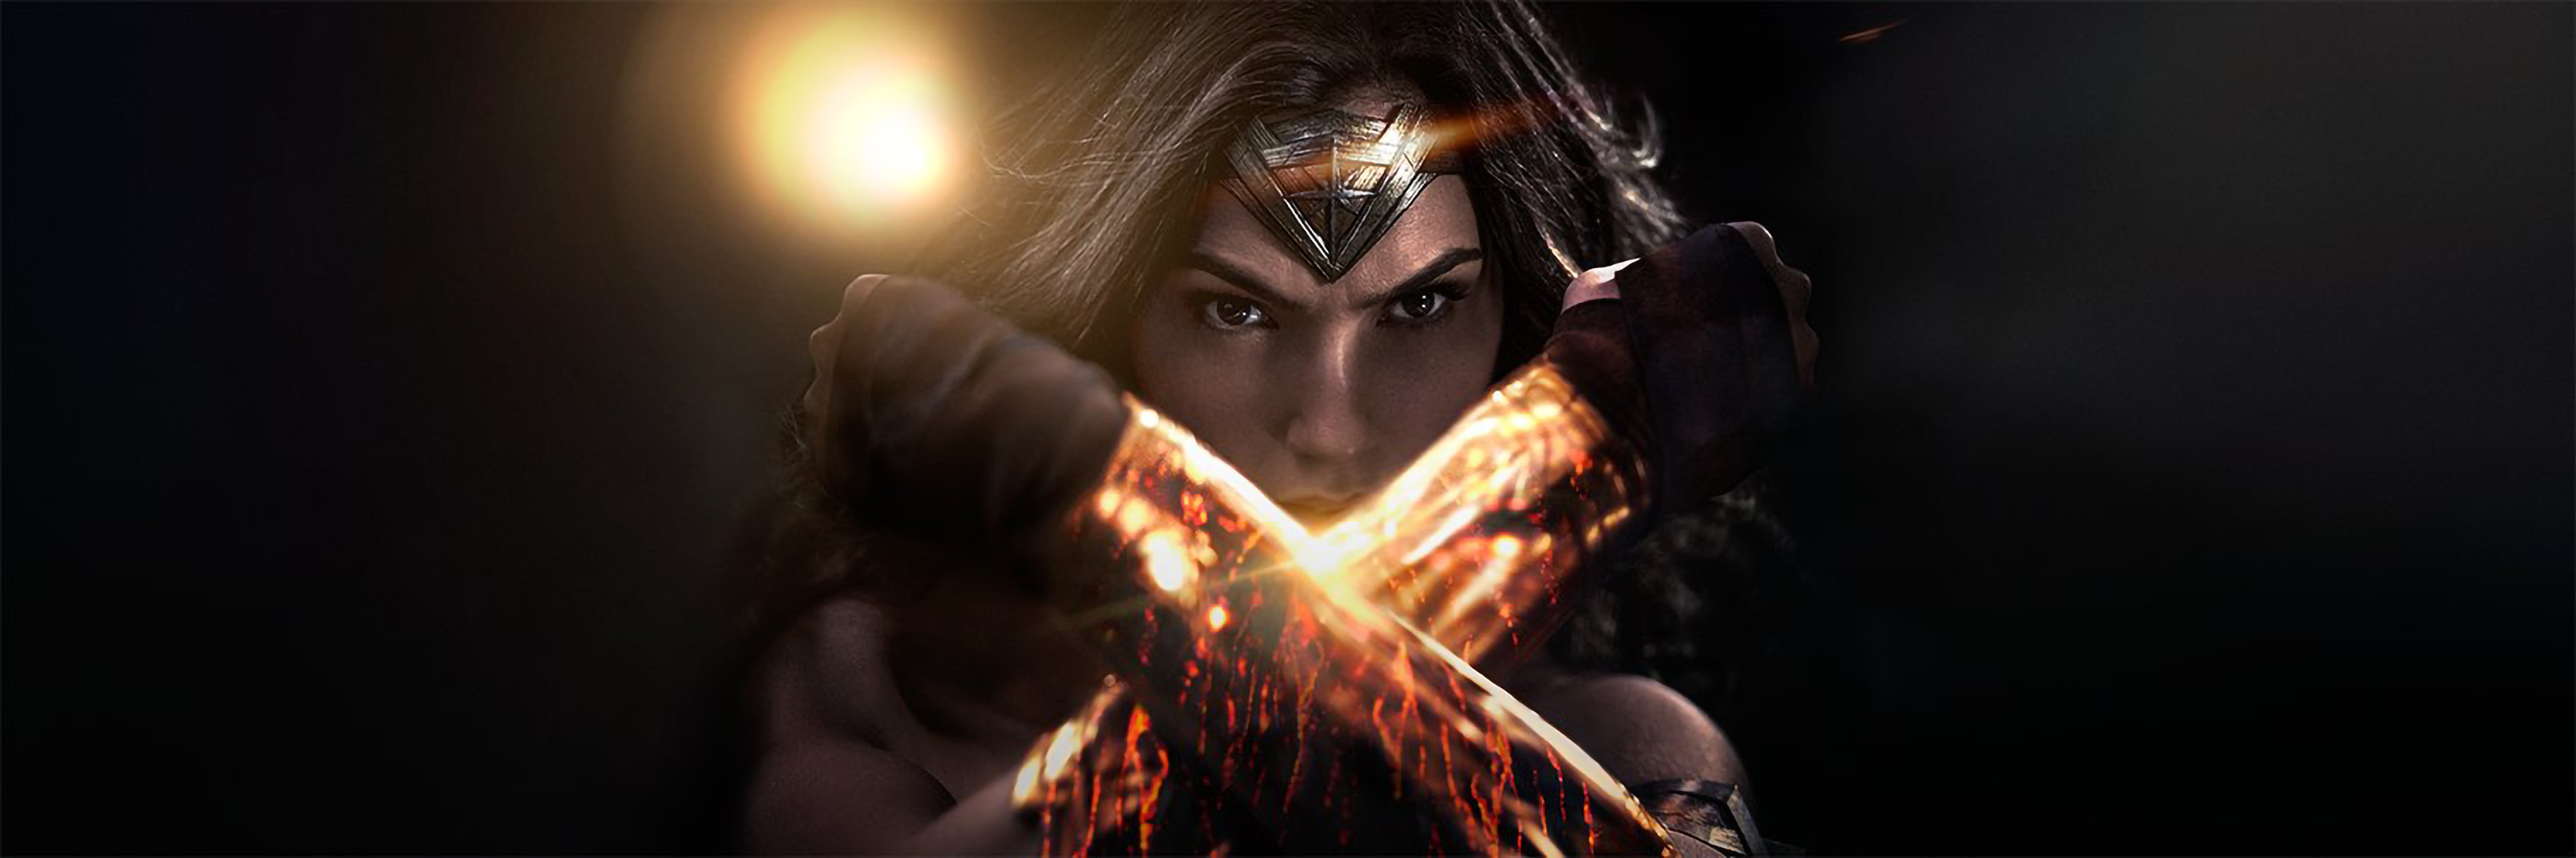 New Wonder Woman Movie Wallpaper Hd Movies 4k Wallpapers Images And